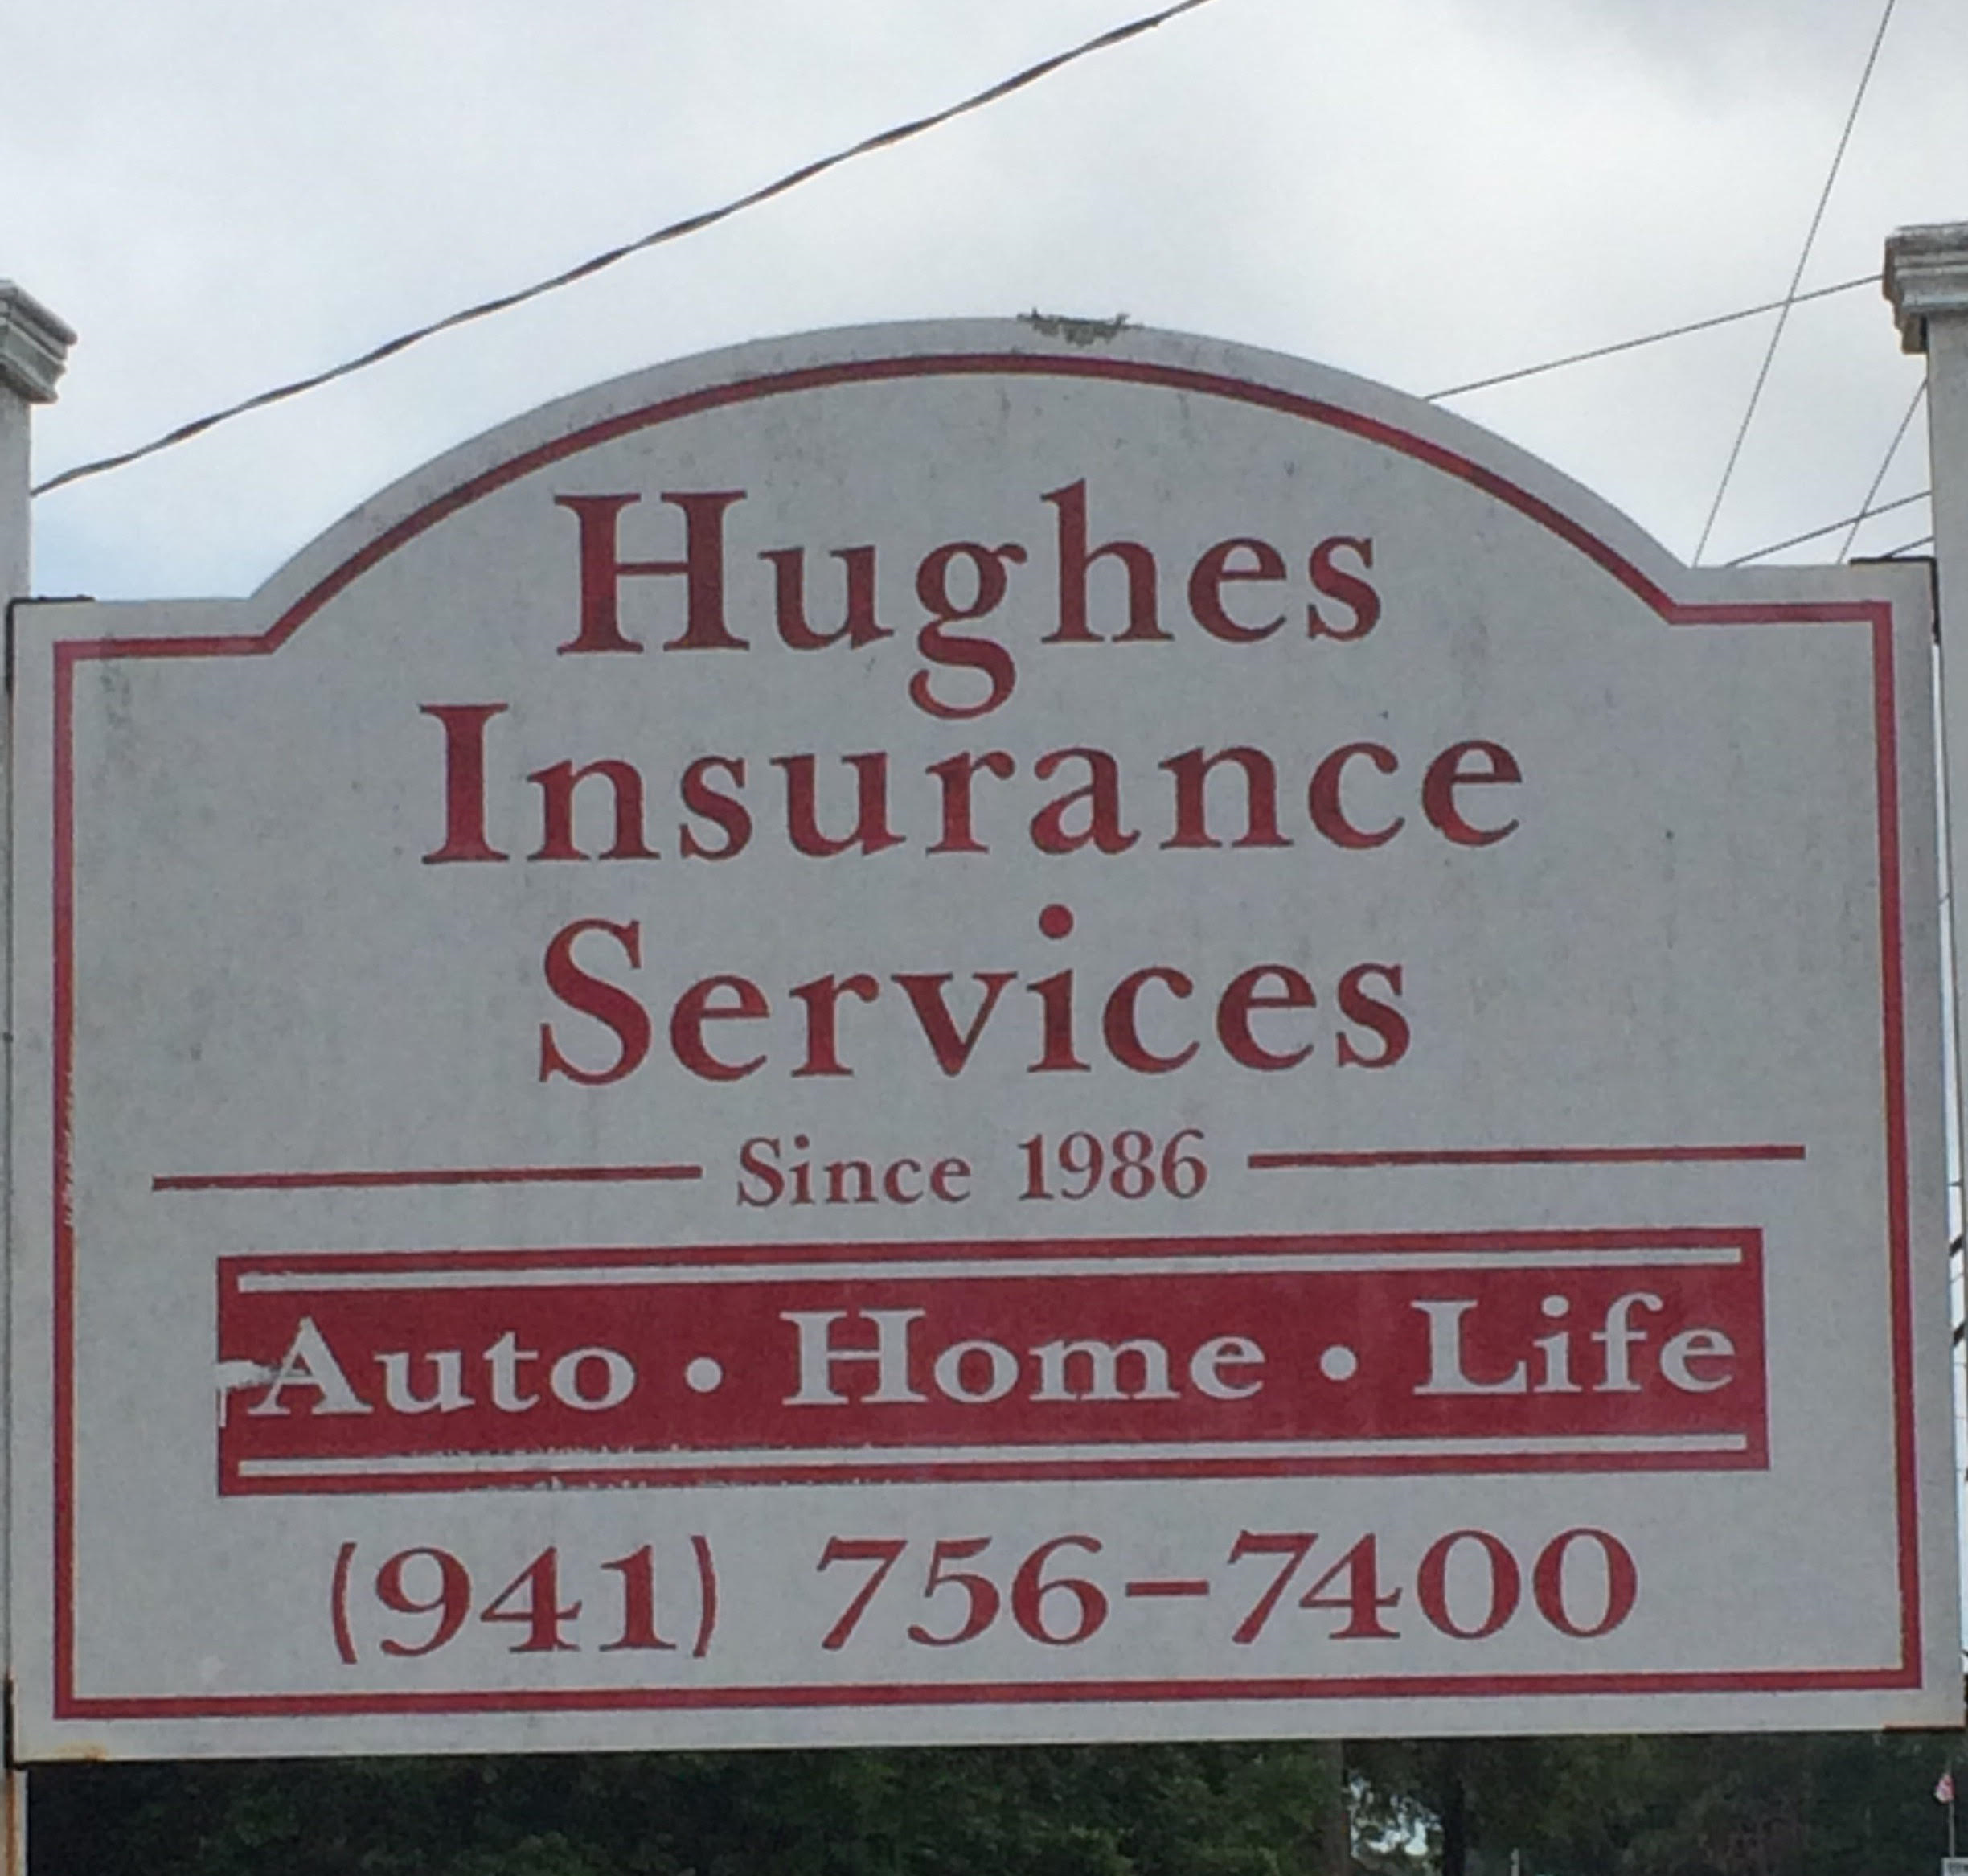 A sign reads: Hughes Insurance Services. Auto, Home, Life. 941-756-7400. Get insurance in Bradenton.